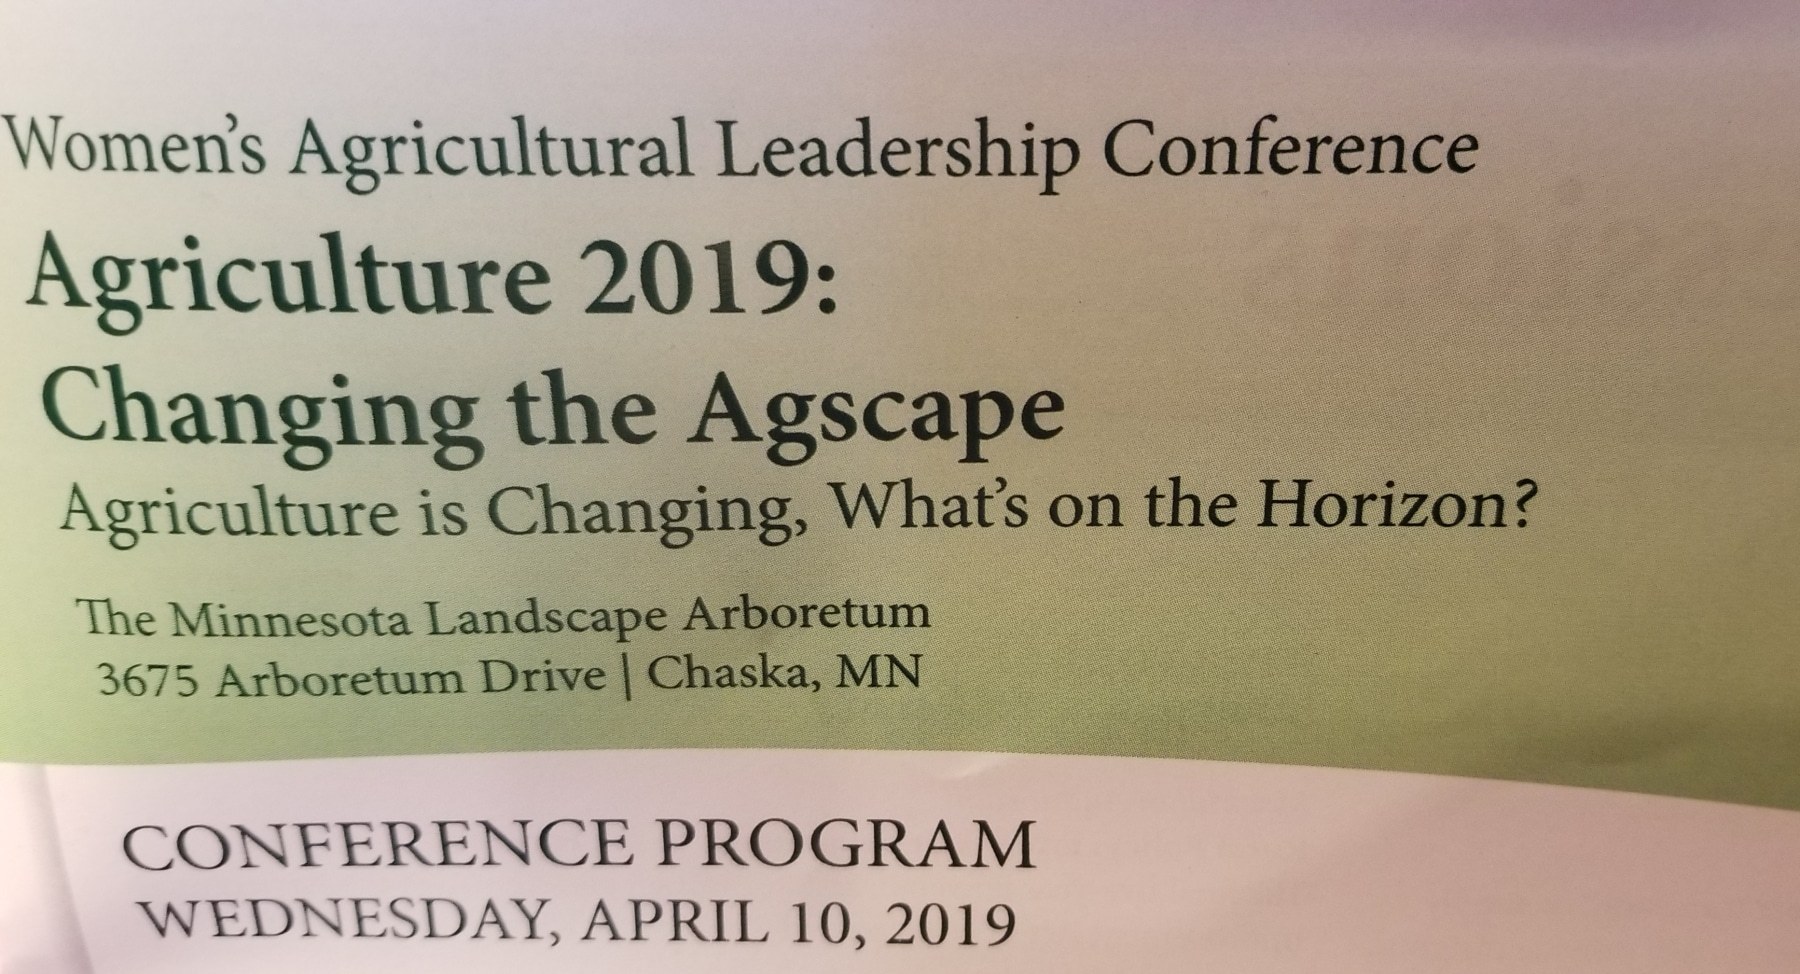 Women's Agricultural Leadership Conference